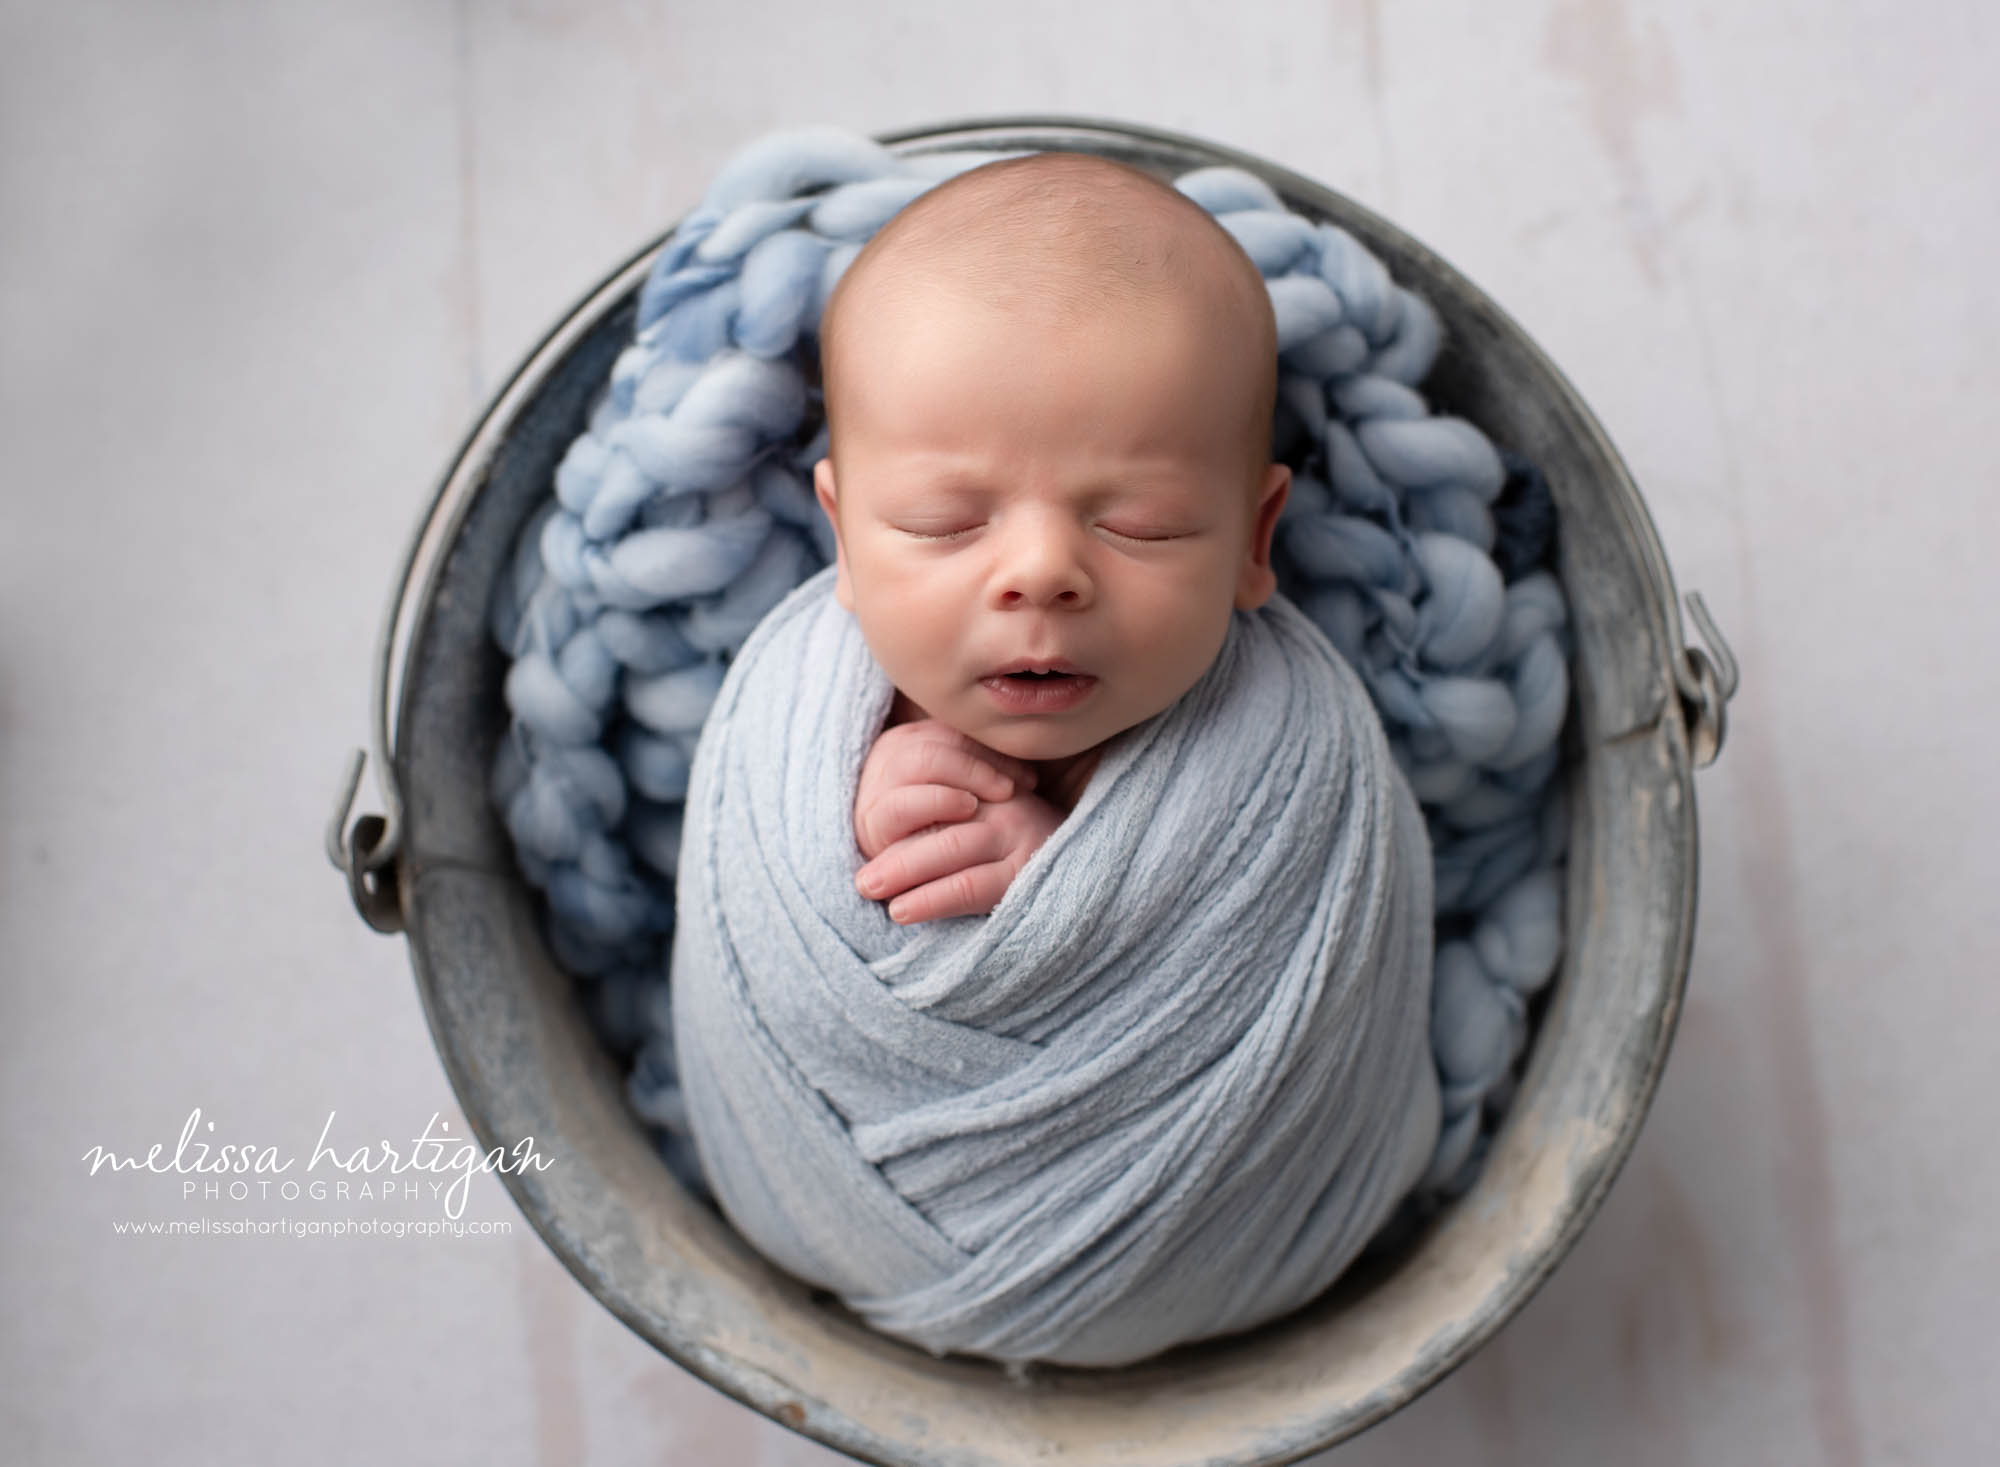 Newborn boy wrapped in metal bucket with blue knitted layer